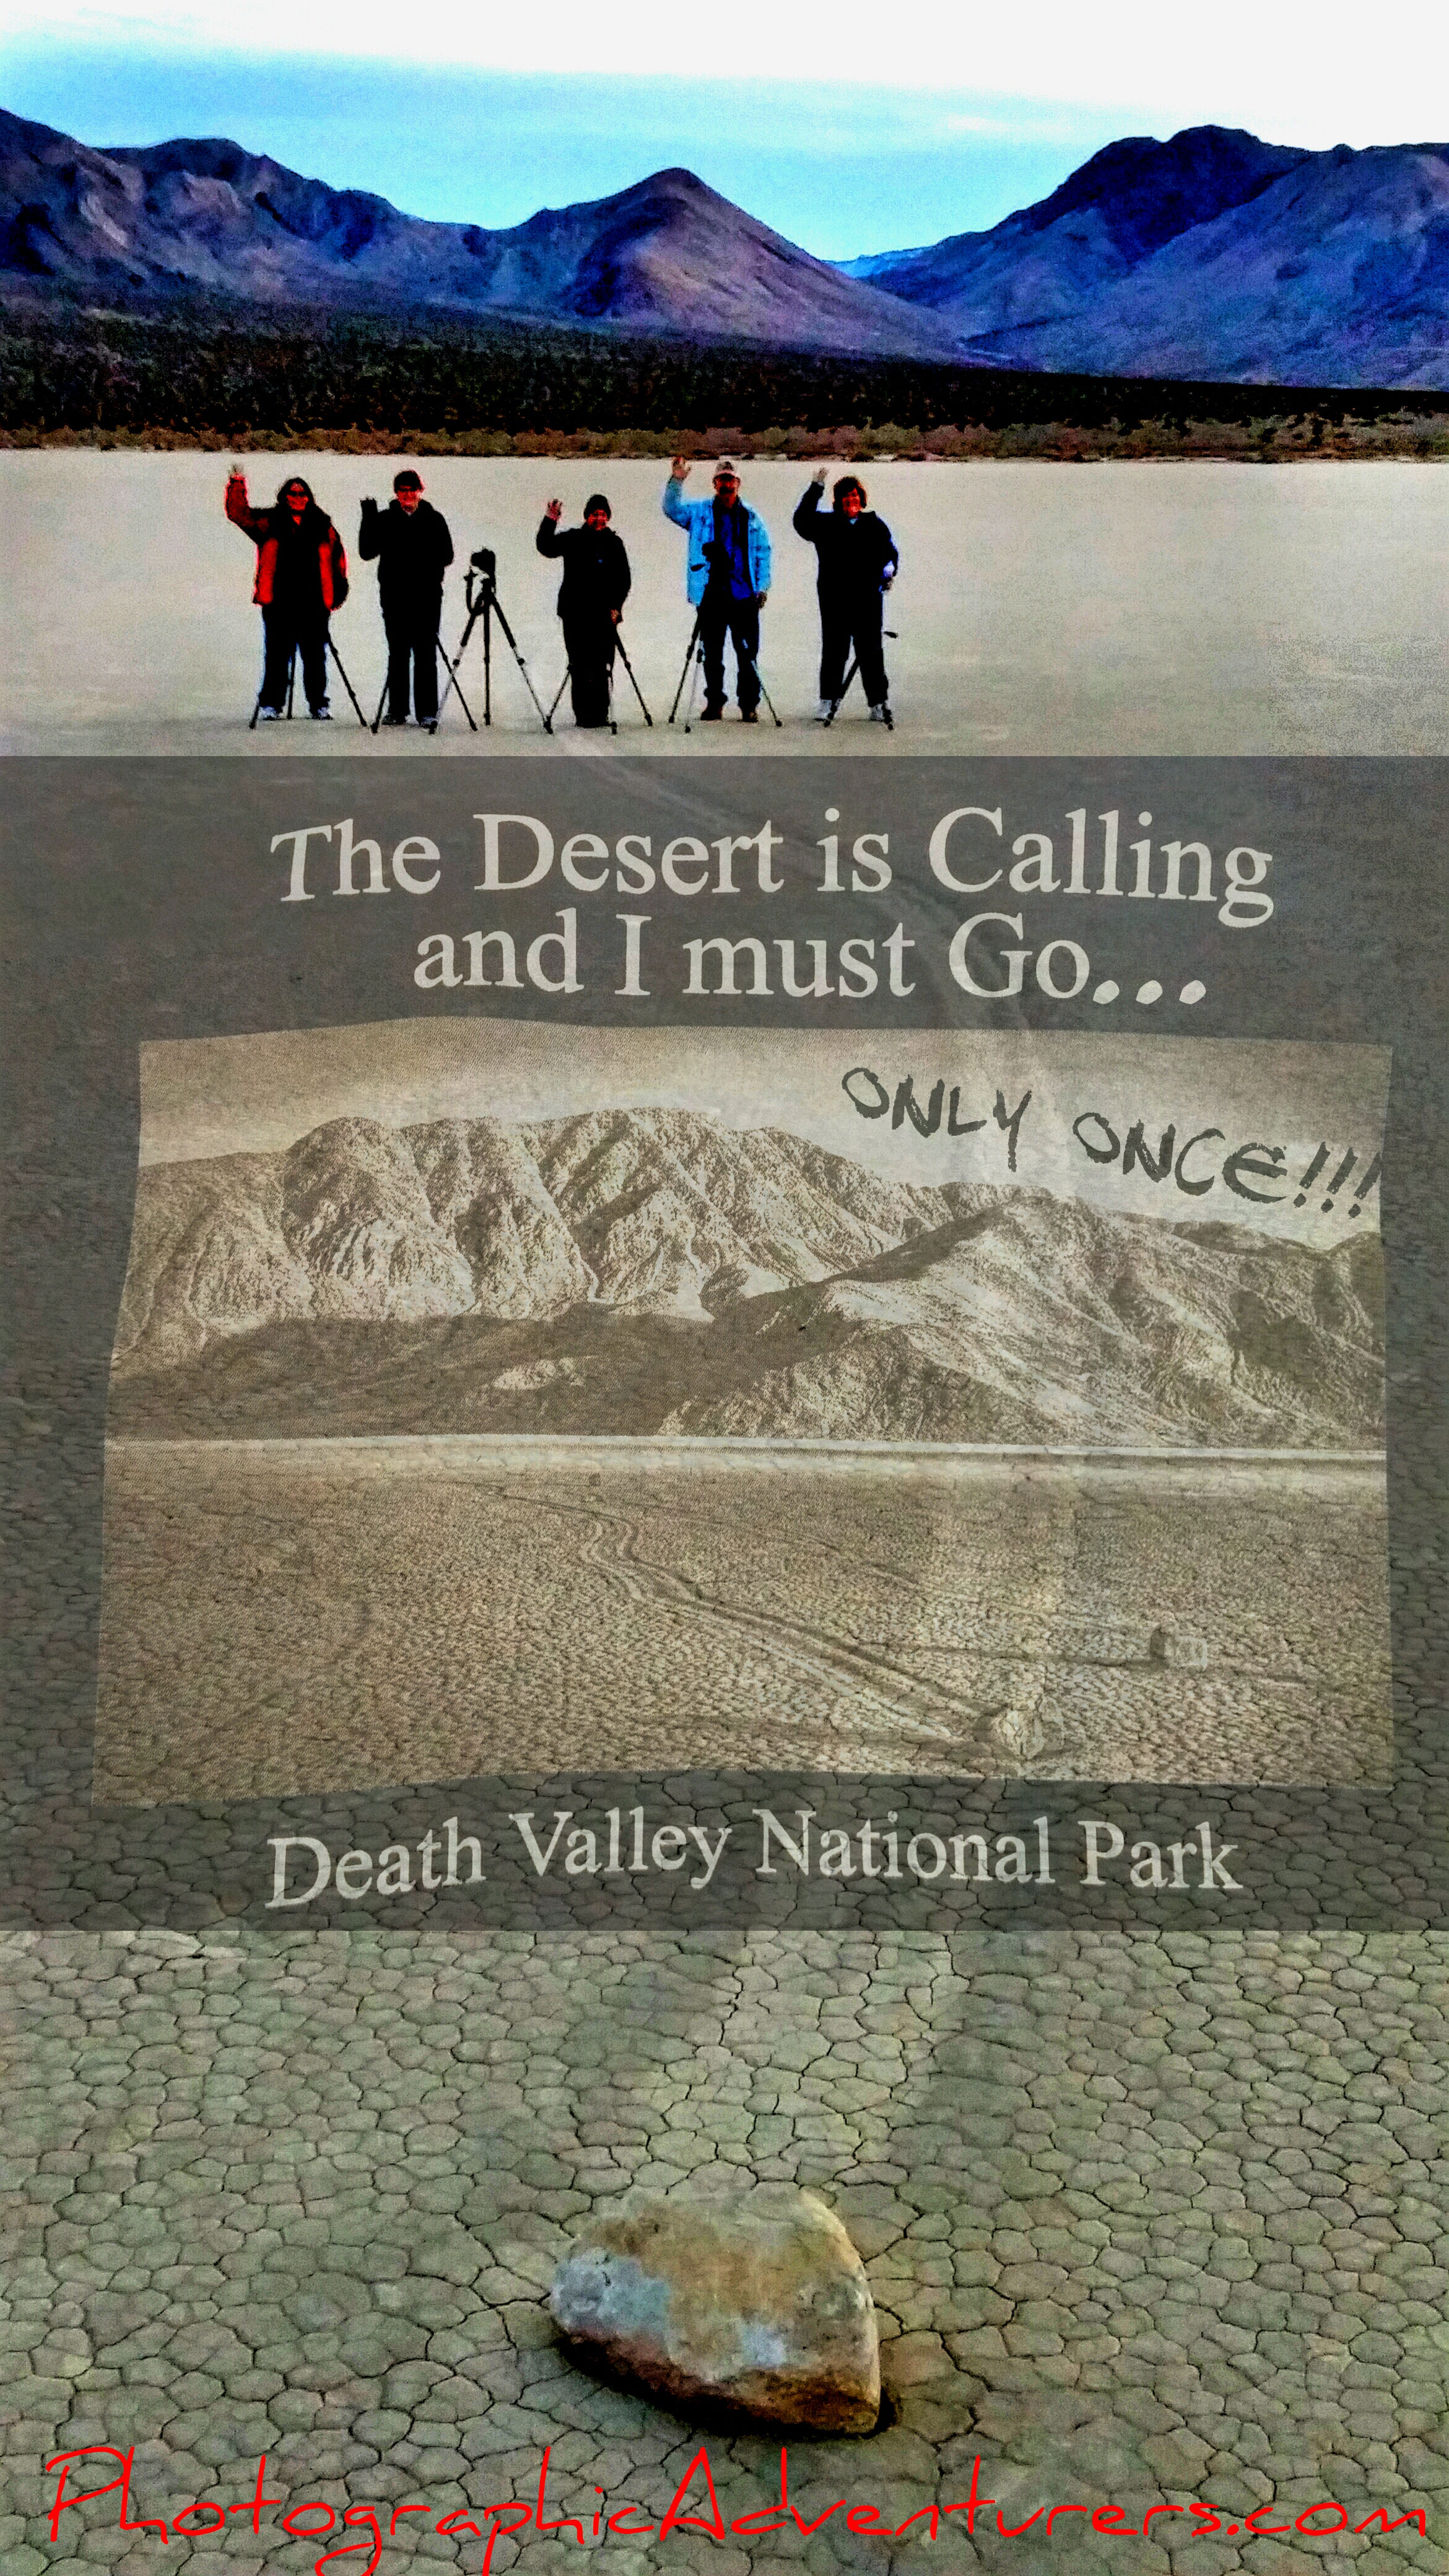 The Racetrack Death Valley